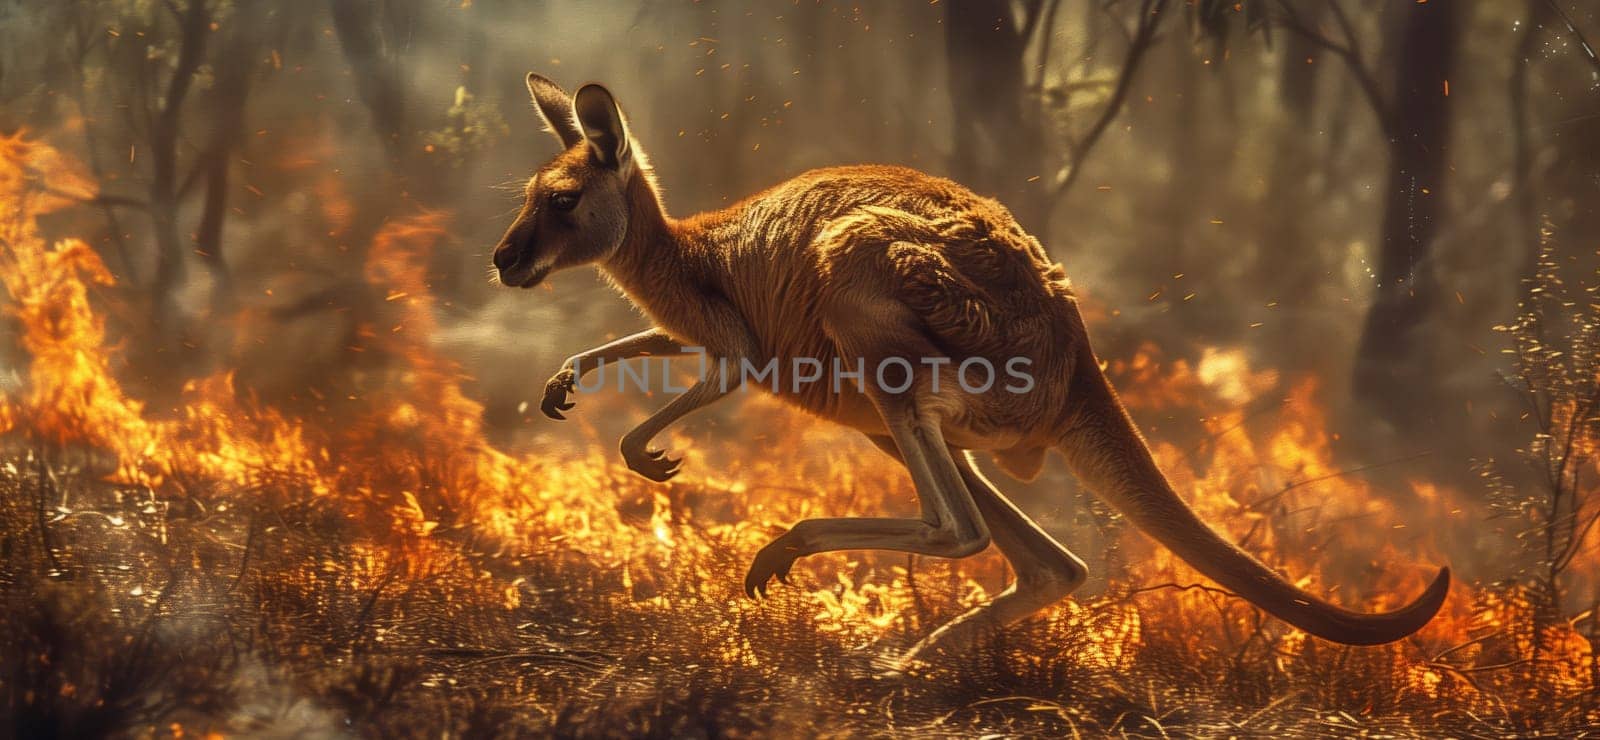 A carnivorous terrestrial animal, resembling a dinosaur, with a tail similar to a dog breed, is running through a field of fire amidst a grassy landscape